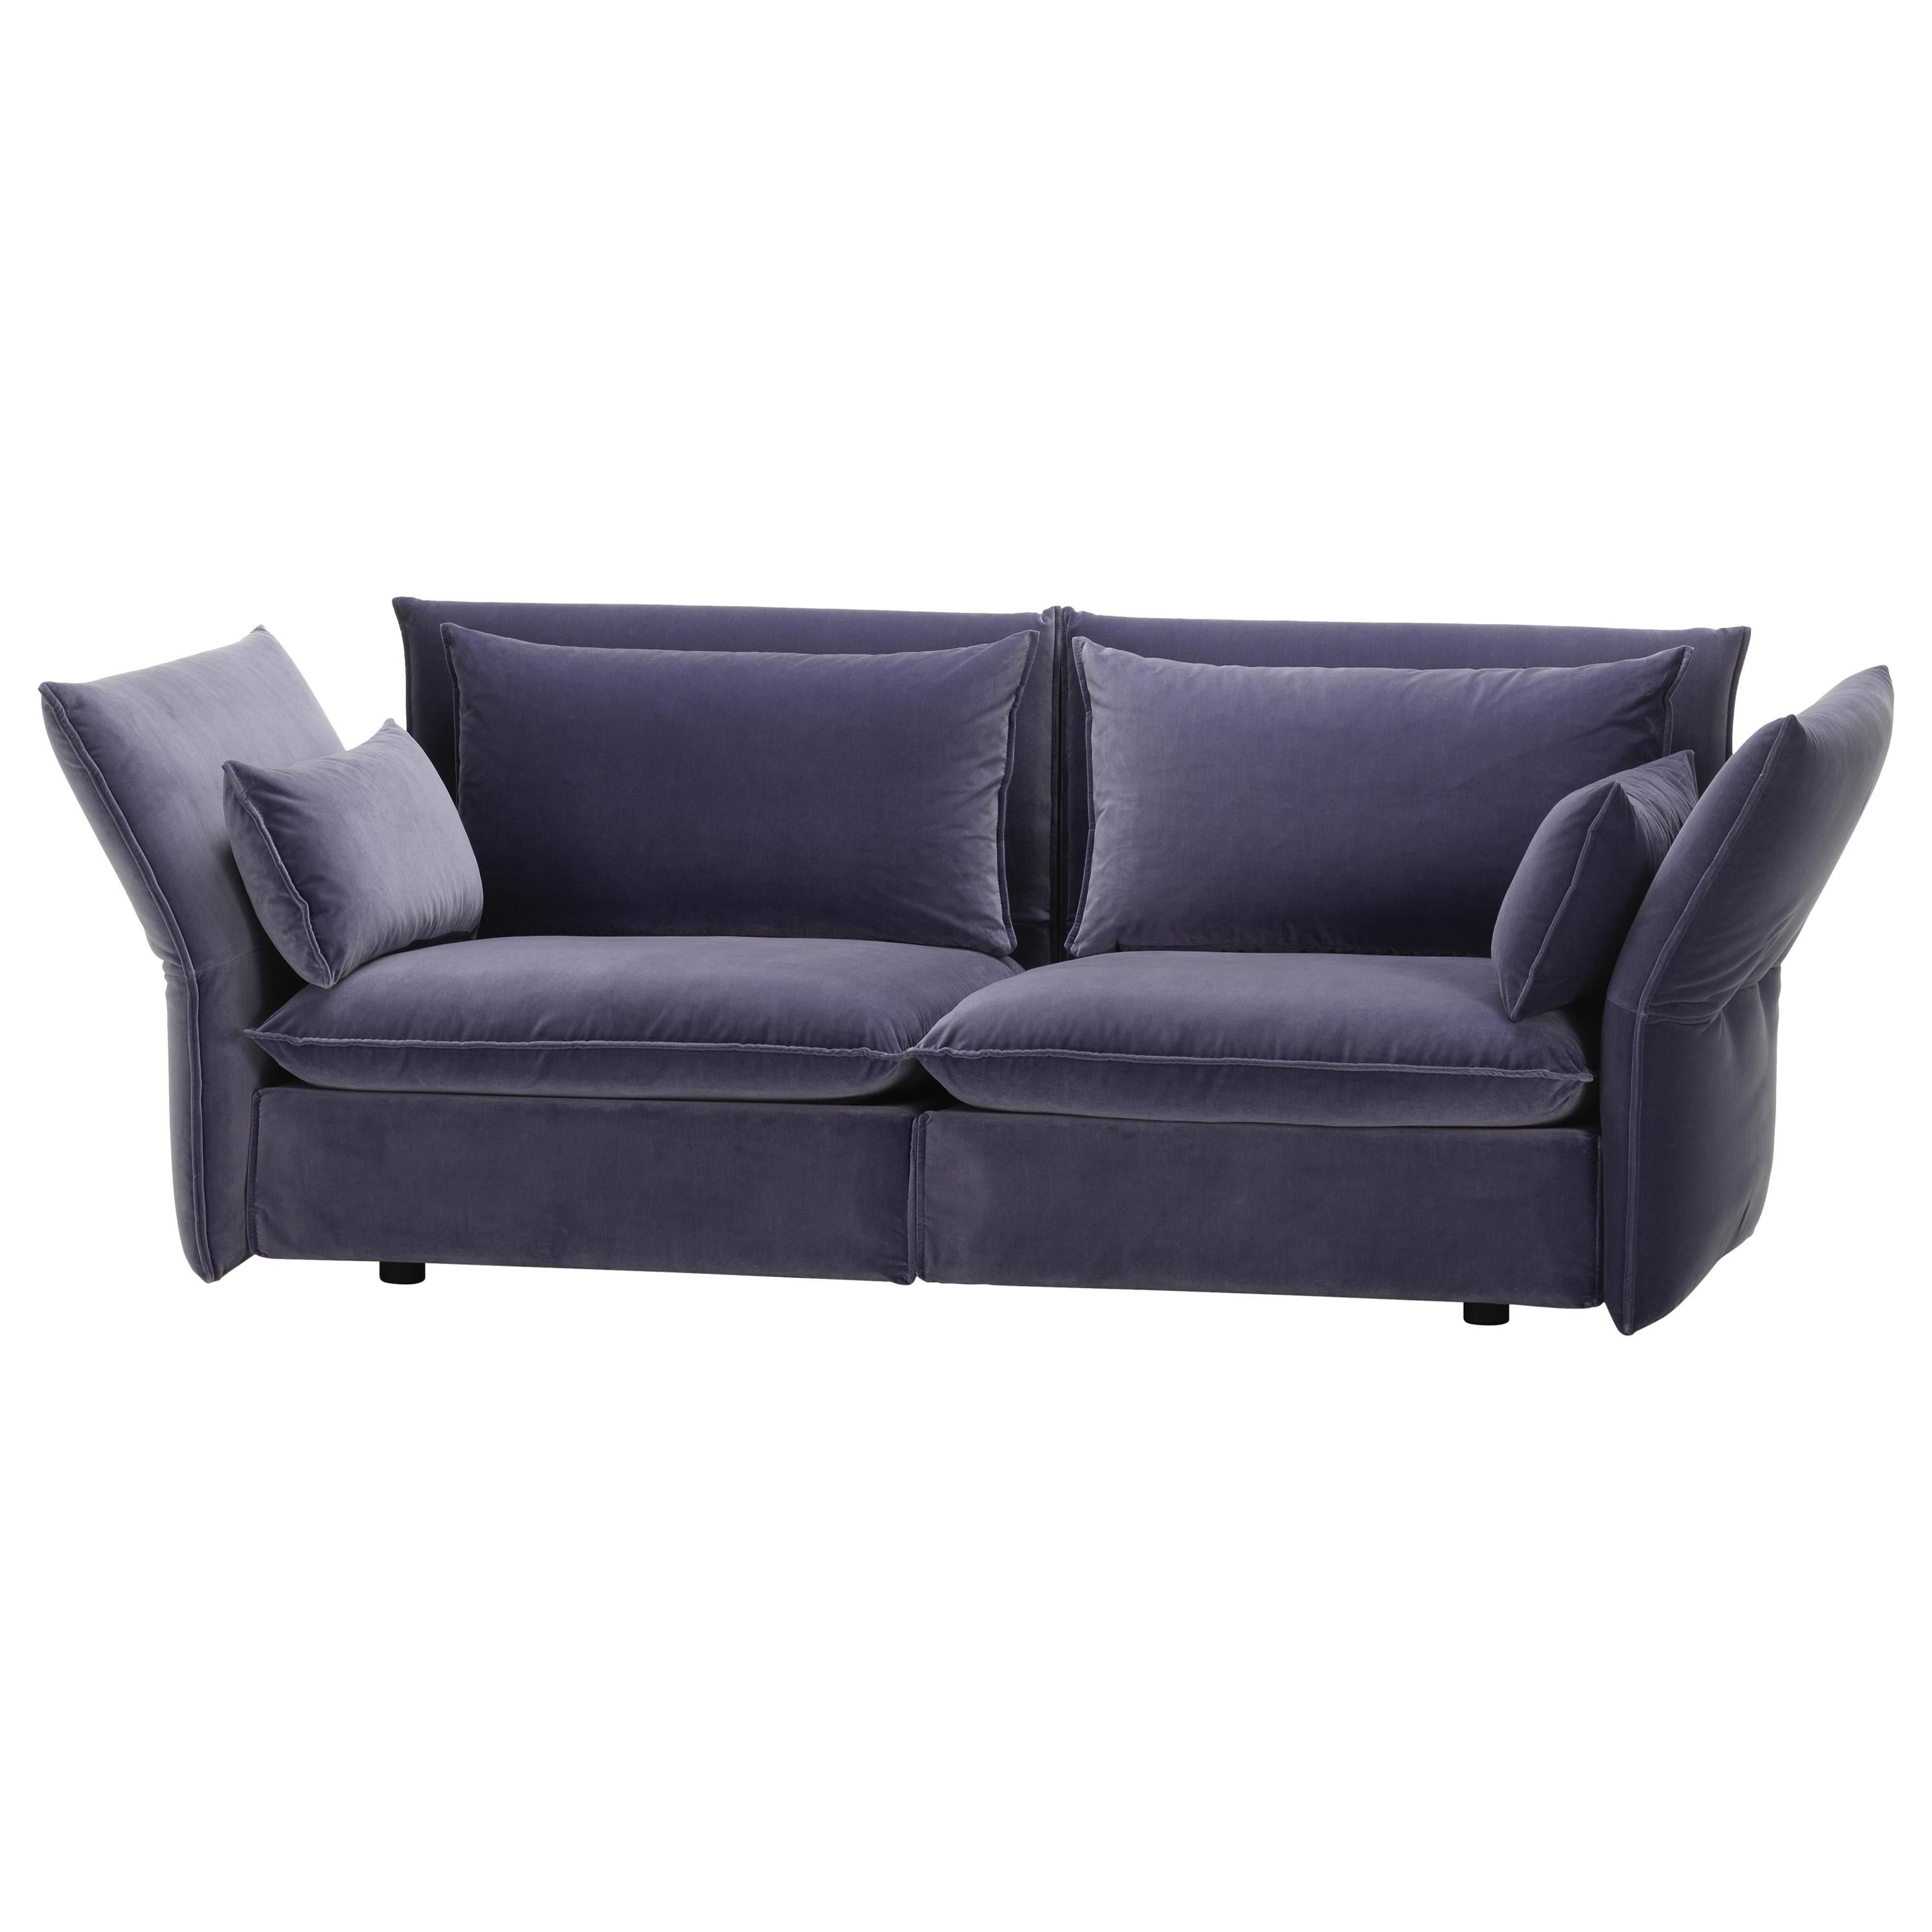 Vitra Mariposa 2-1/2 Seat Sofa in Blue Grey Shades by Edward Barber & Jay For Sale